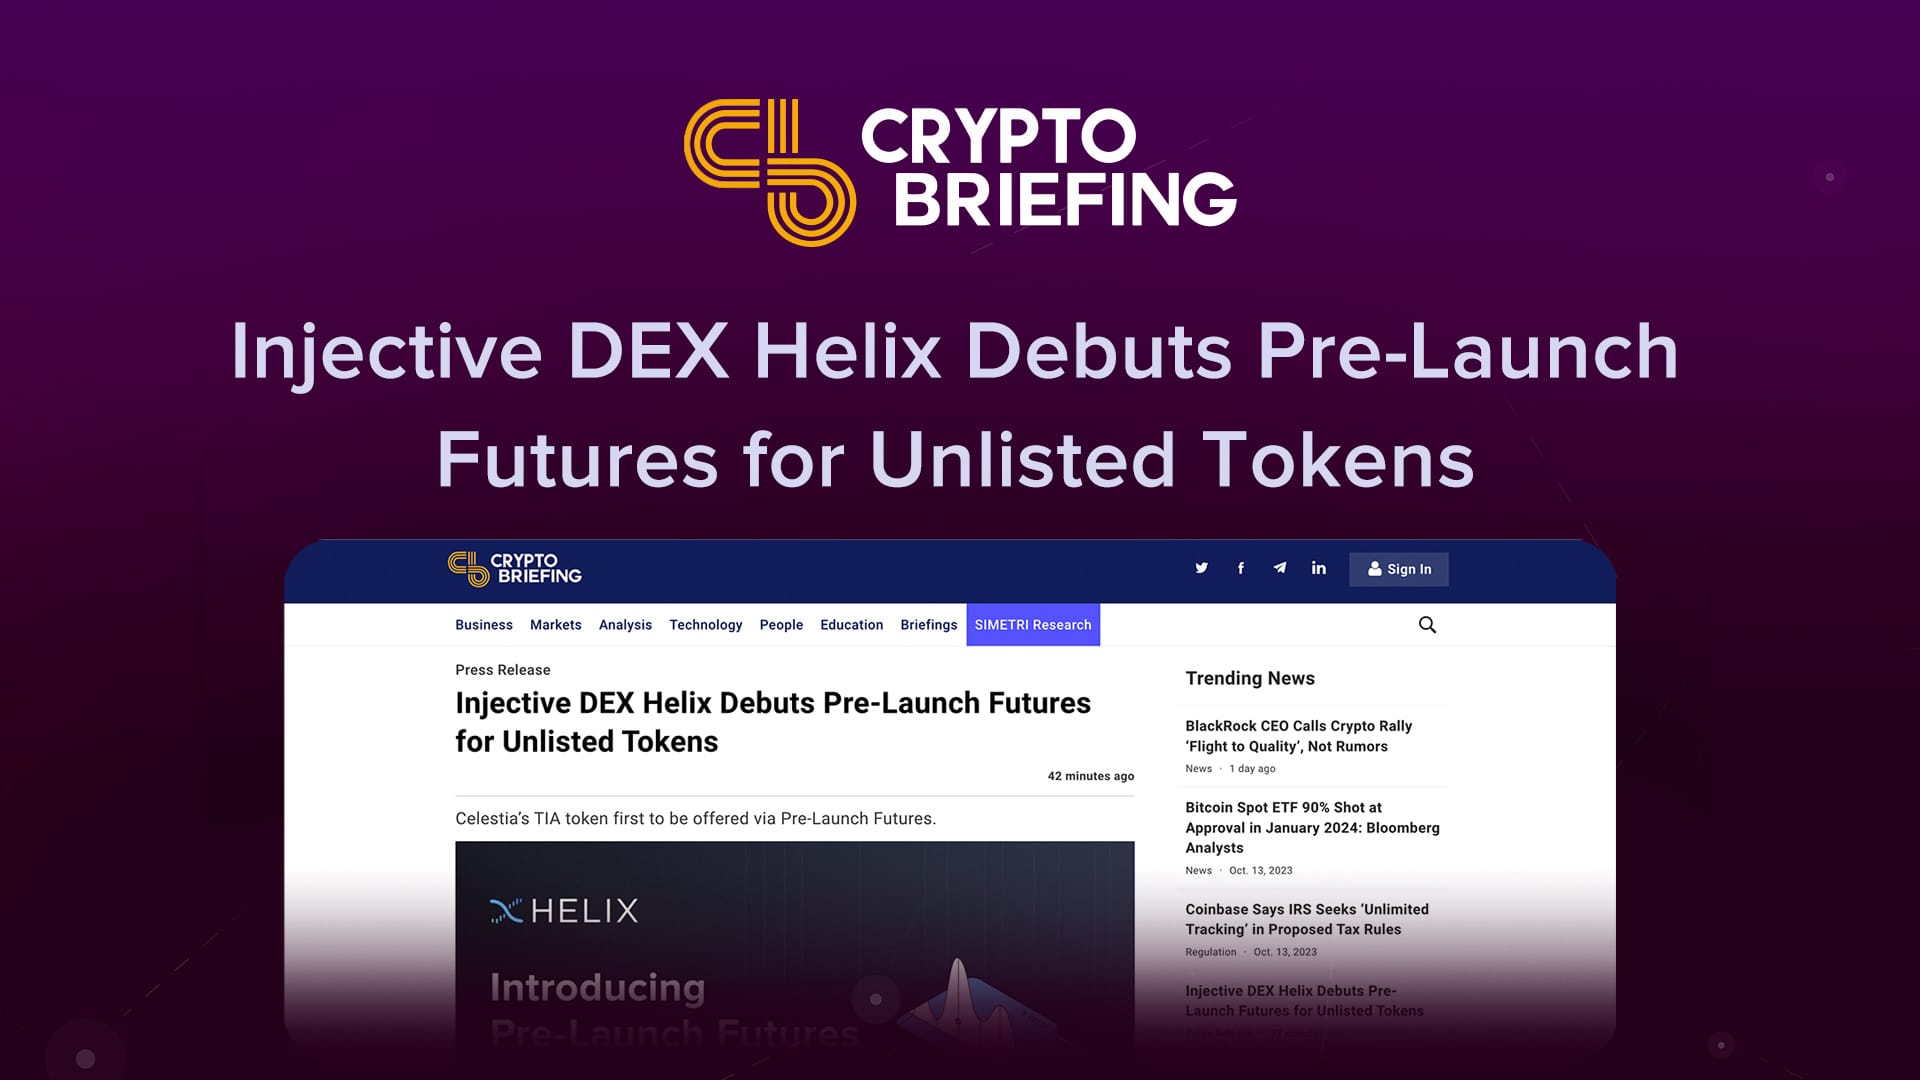 (Crypto Briefing) Injective DEX Helix Debuts Pre-Launch Futures for Unlisted Tokens